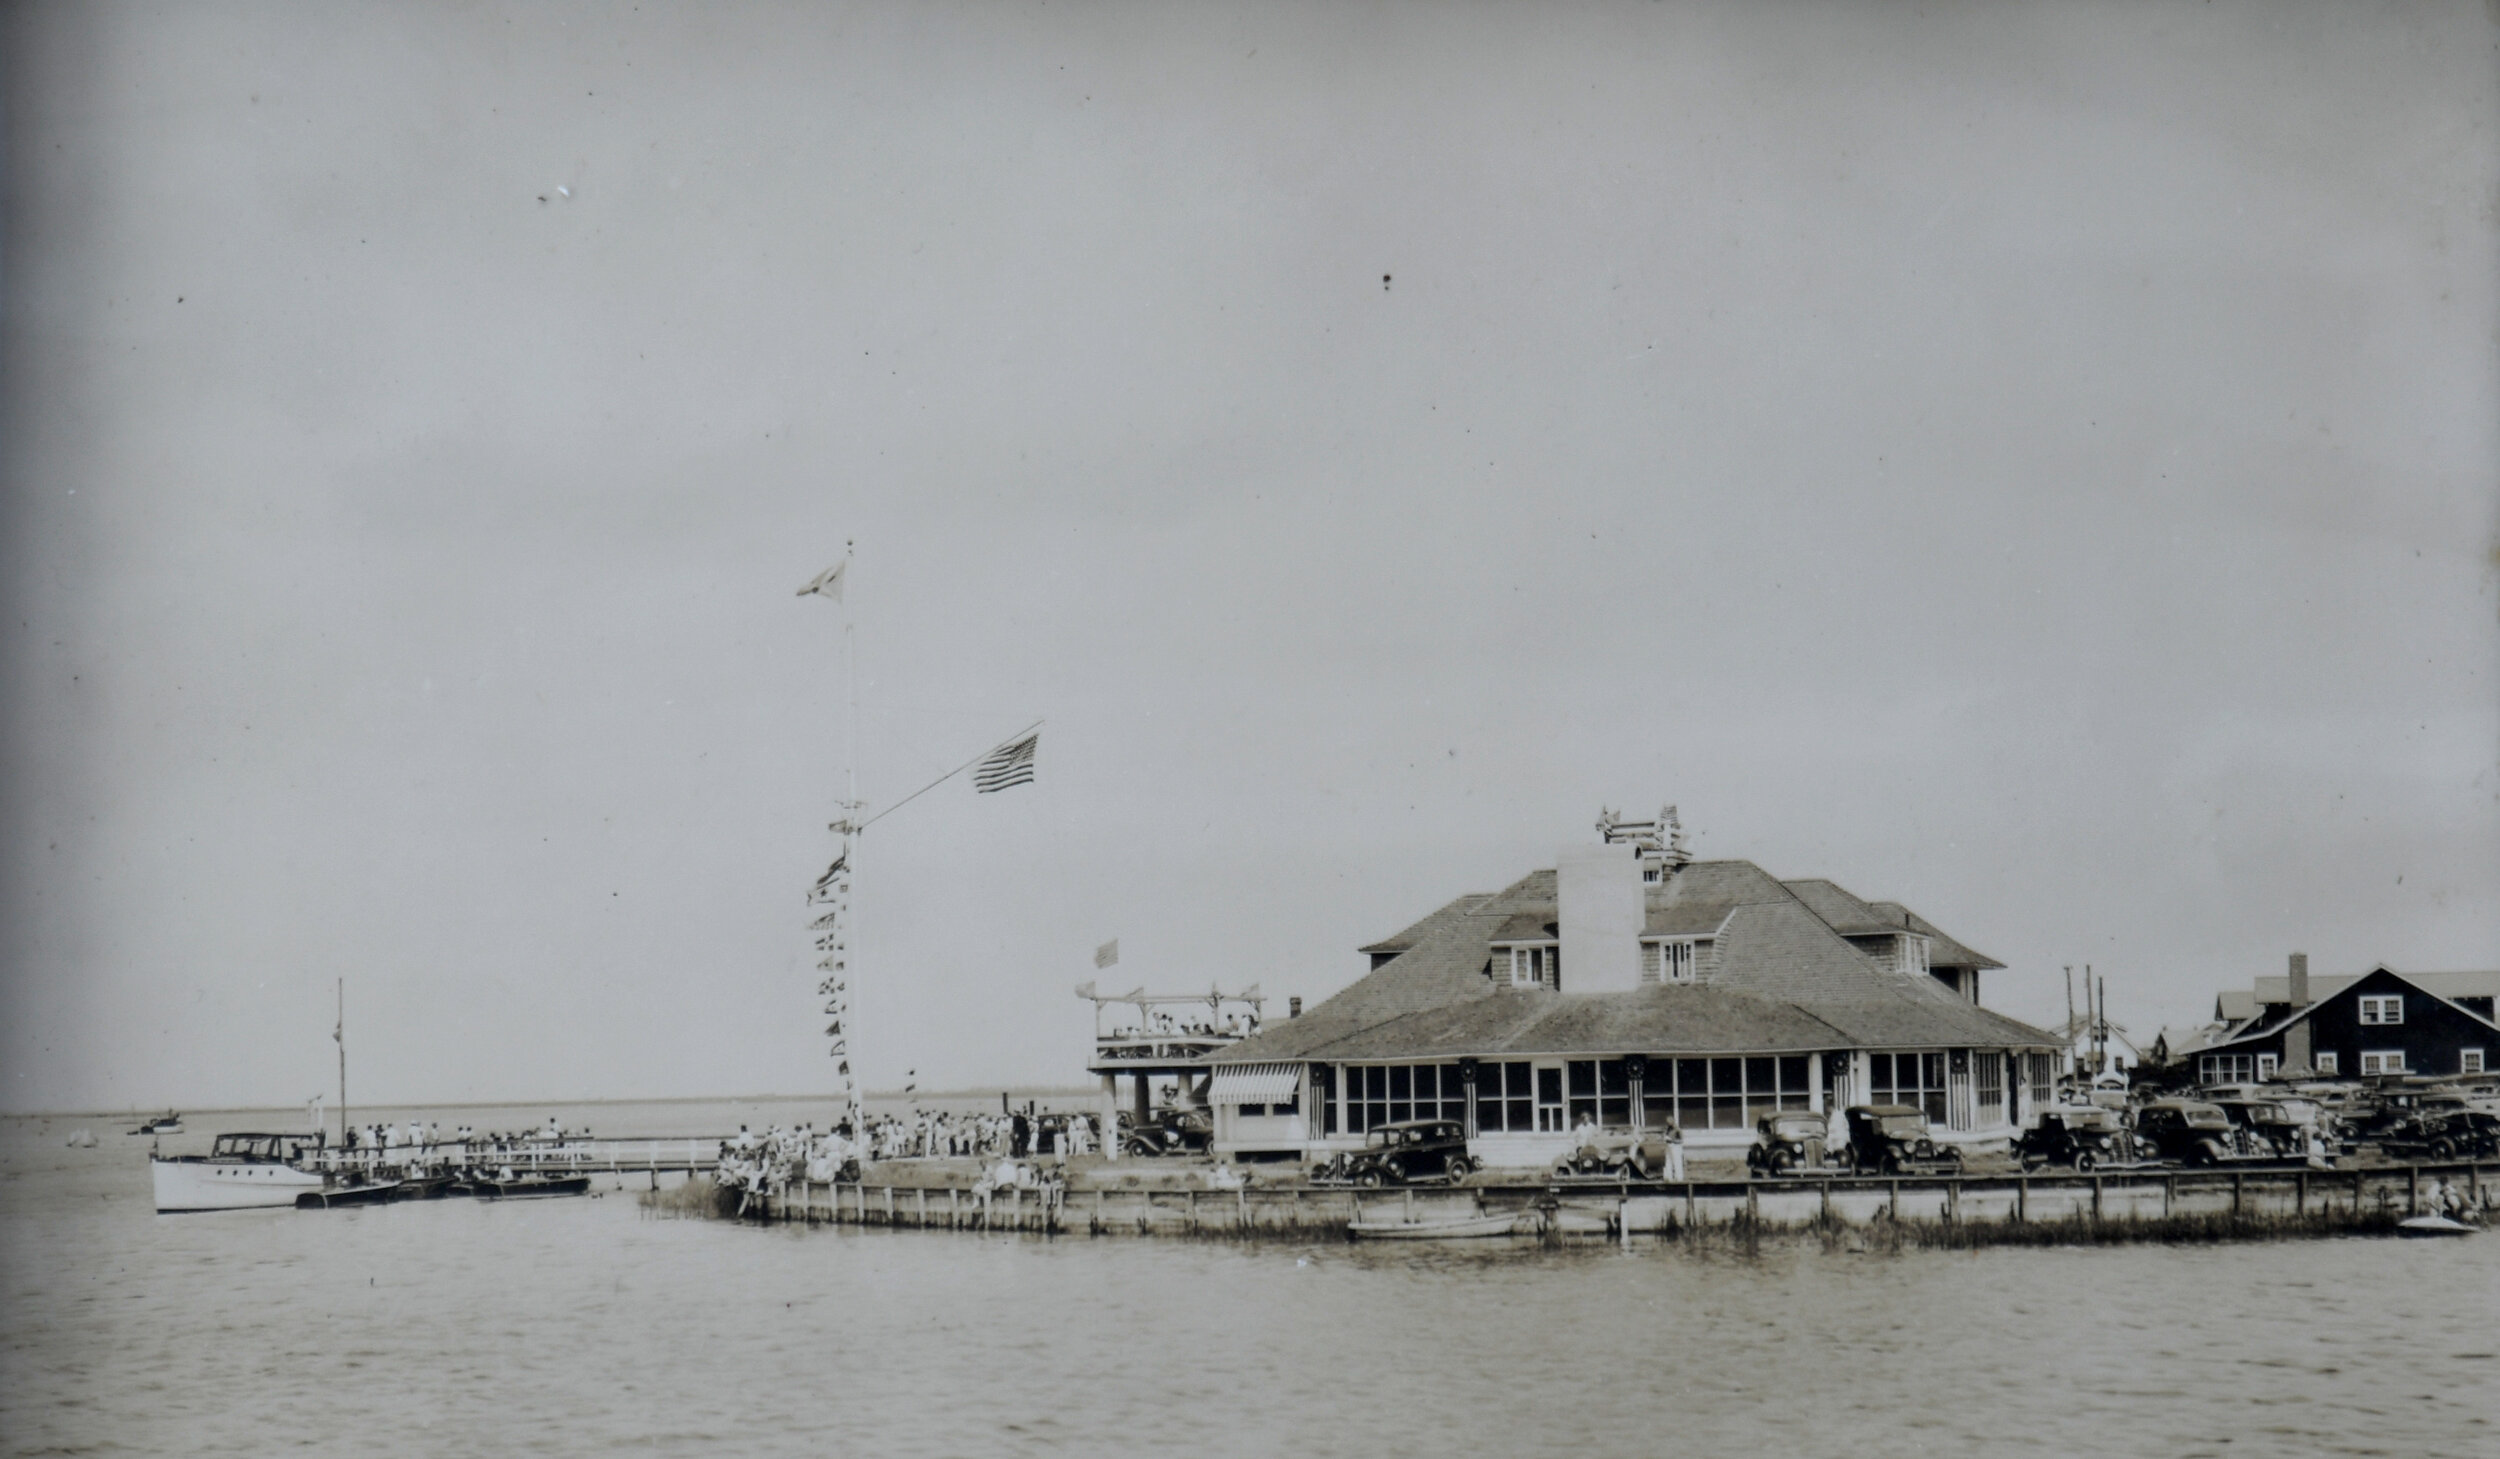 A look at the Yacht Club of Stone Harbor in 1932.